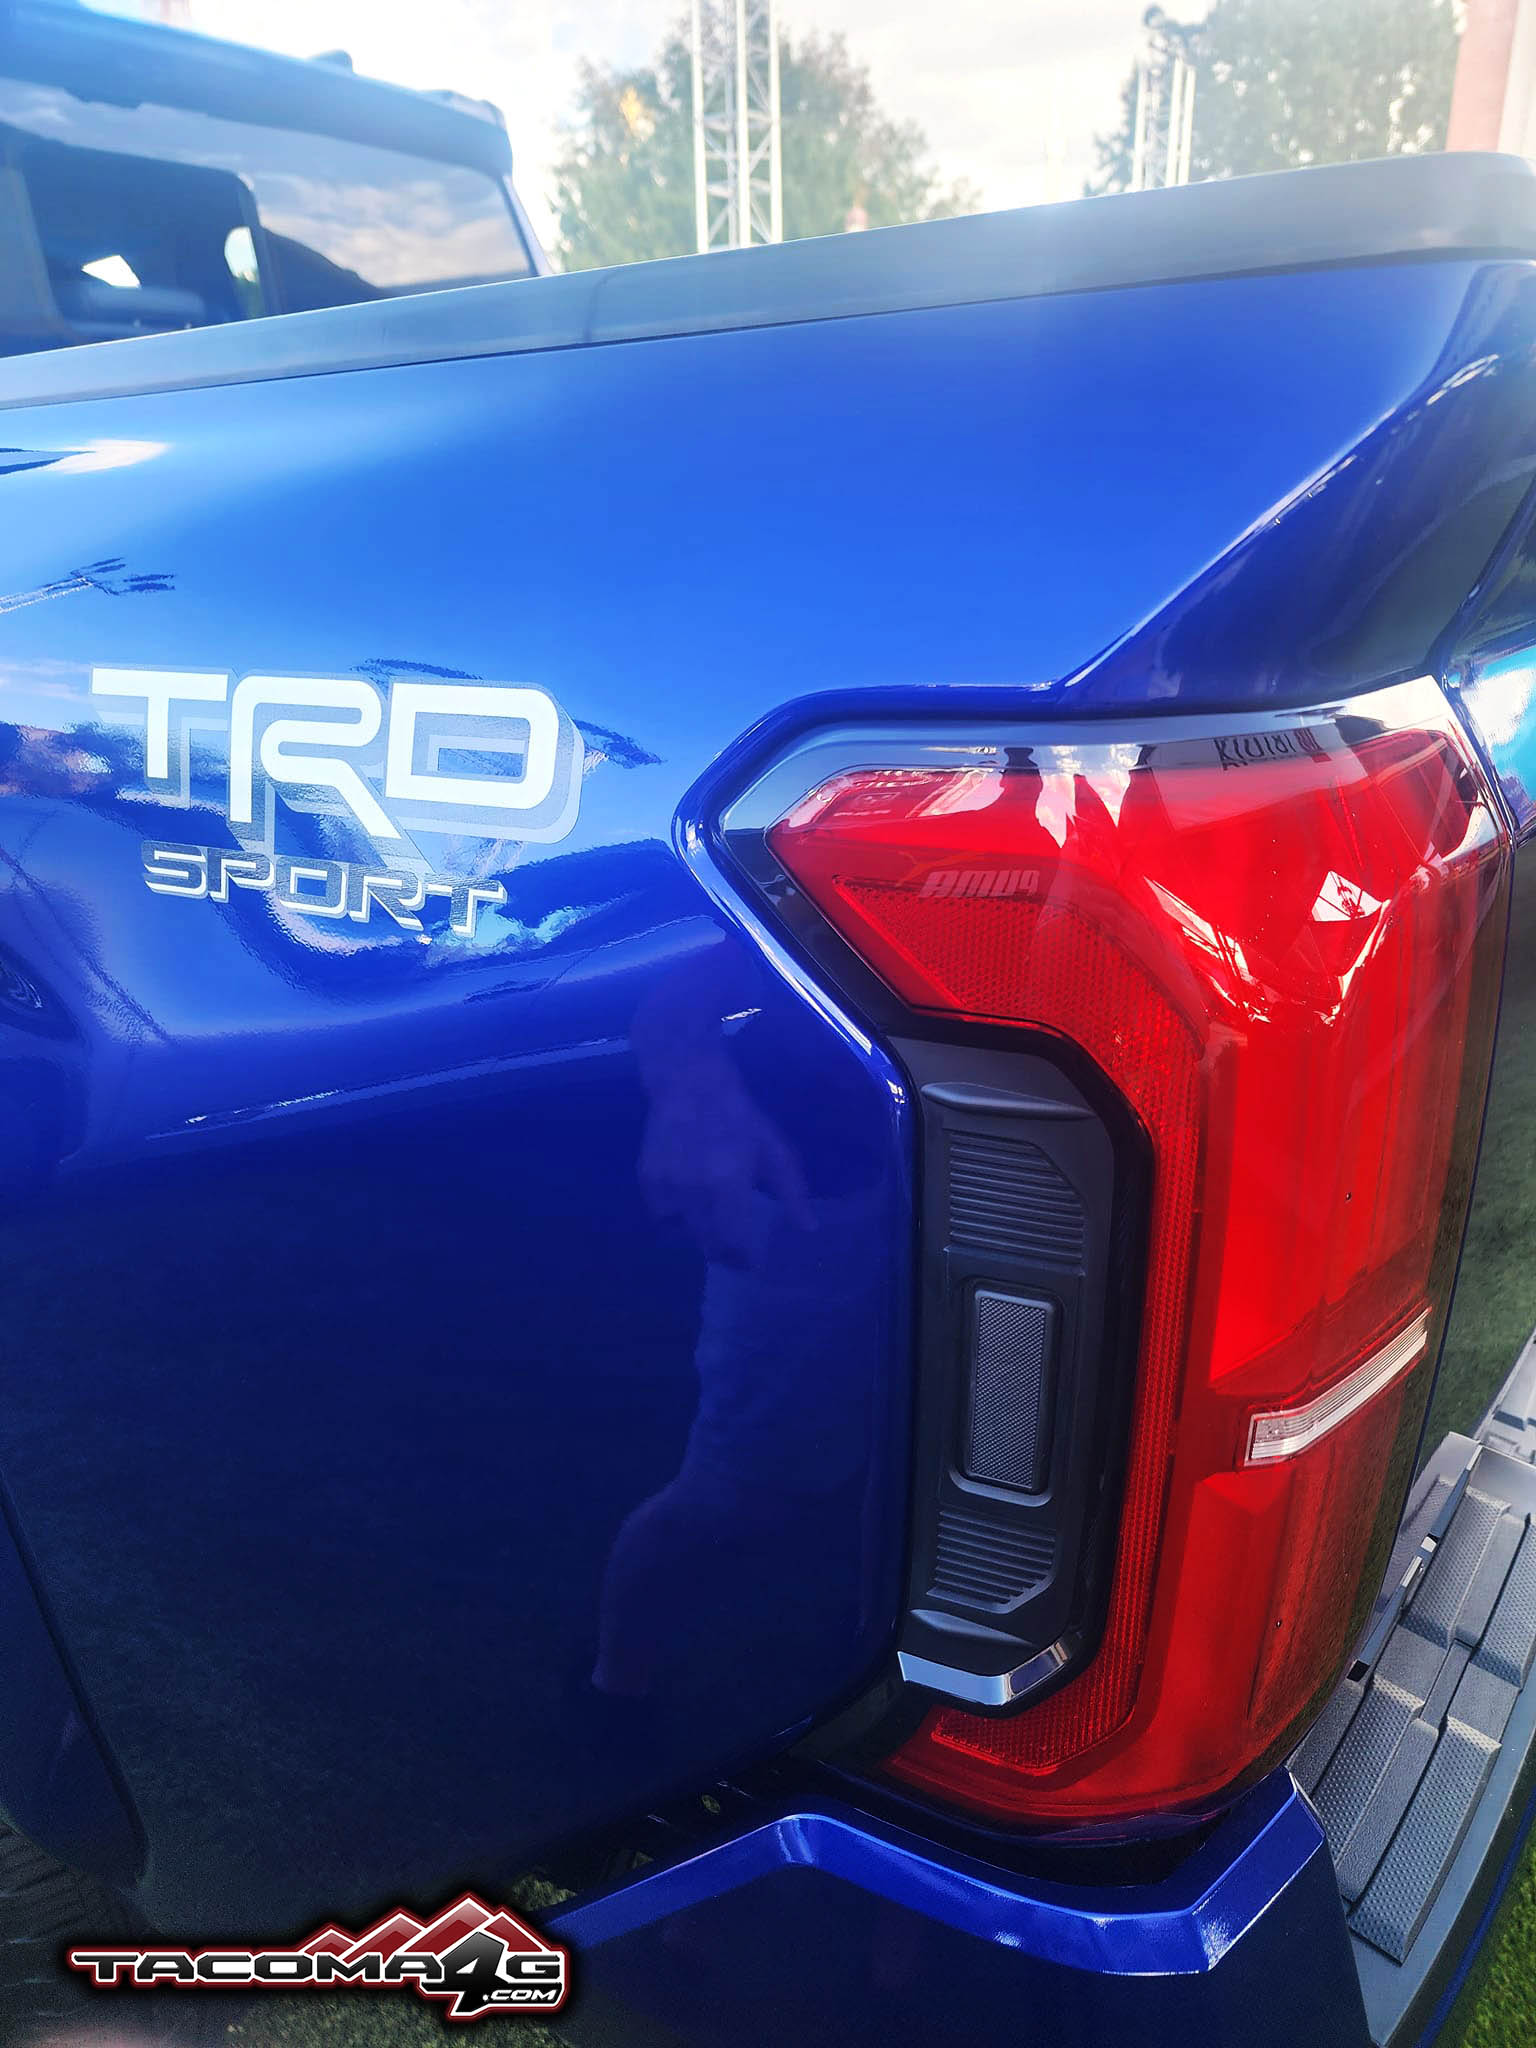 2024 Tacoma Blue Crush Metallic 2024 Tacoma TRD Sport i-Force MAX Hybrid -- exterior & interior first look! 2Blue Crush Metallic 2024 Tacoma Toyota Color Paint Engine Bed 